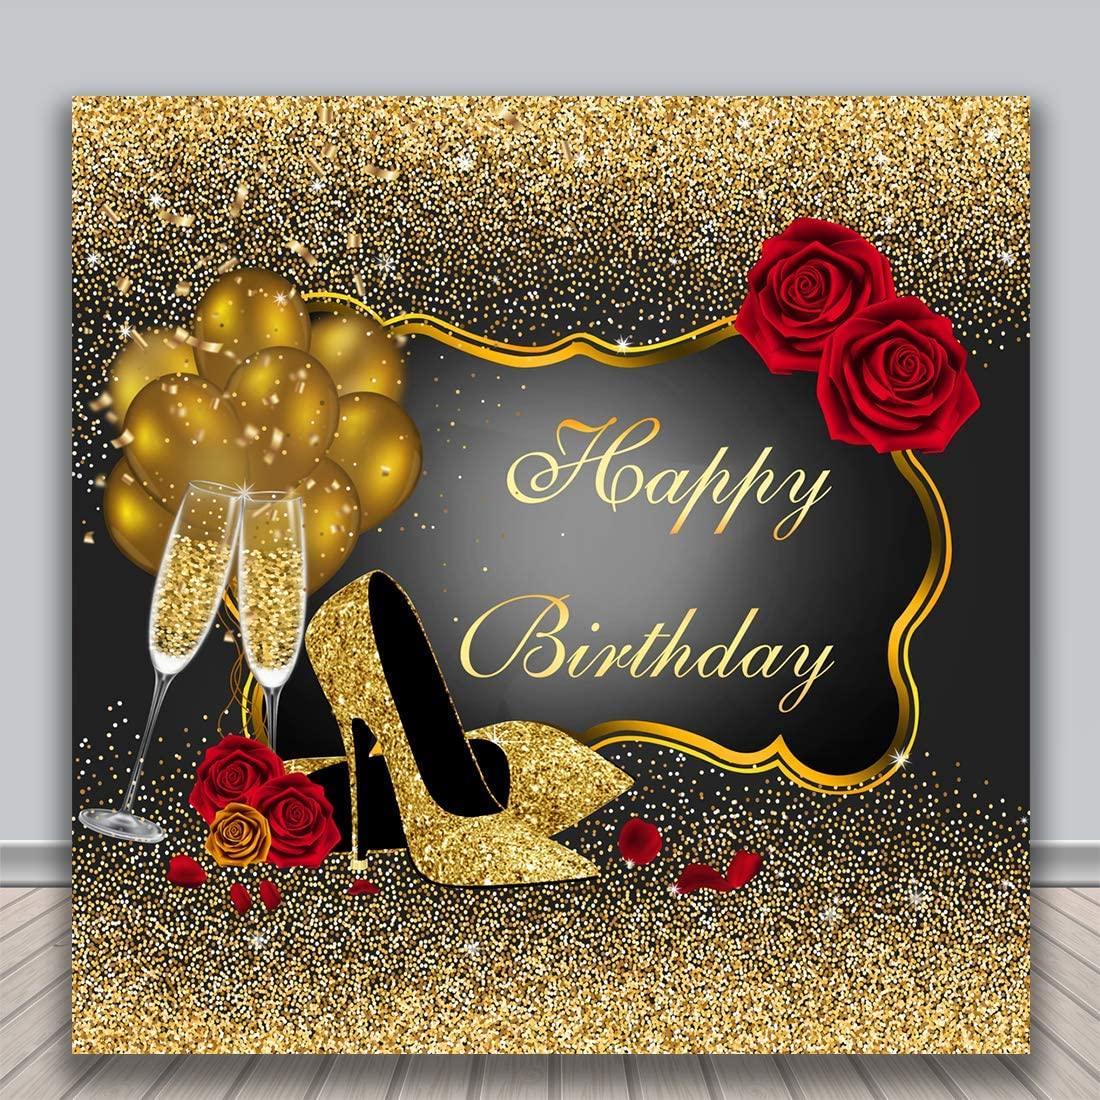 Happy Birthday Backdrop Glitter Gold Red Rose Floral Golden Balloons - If you say i do